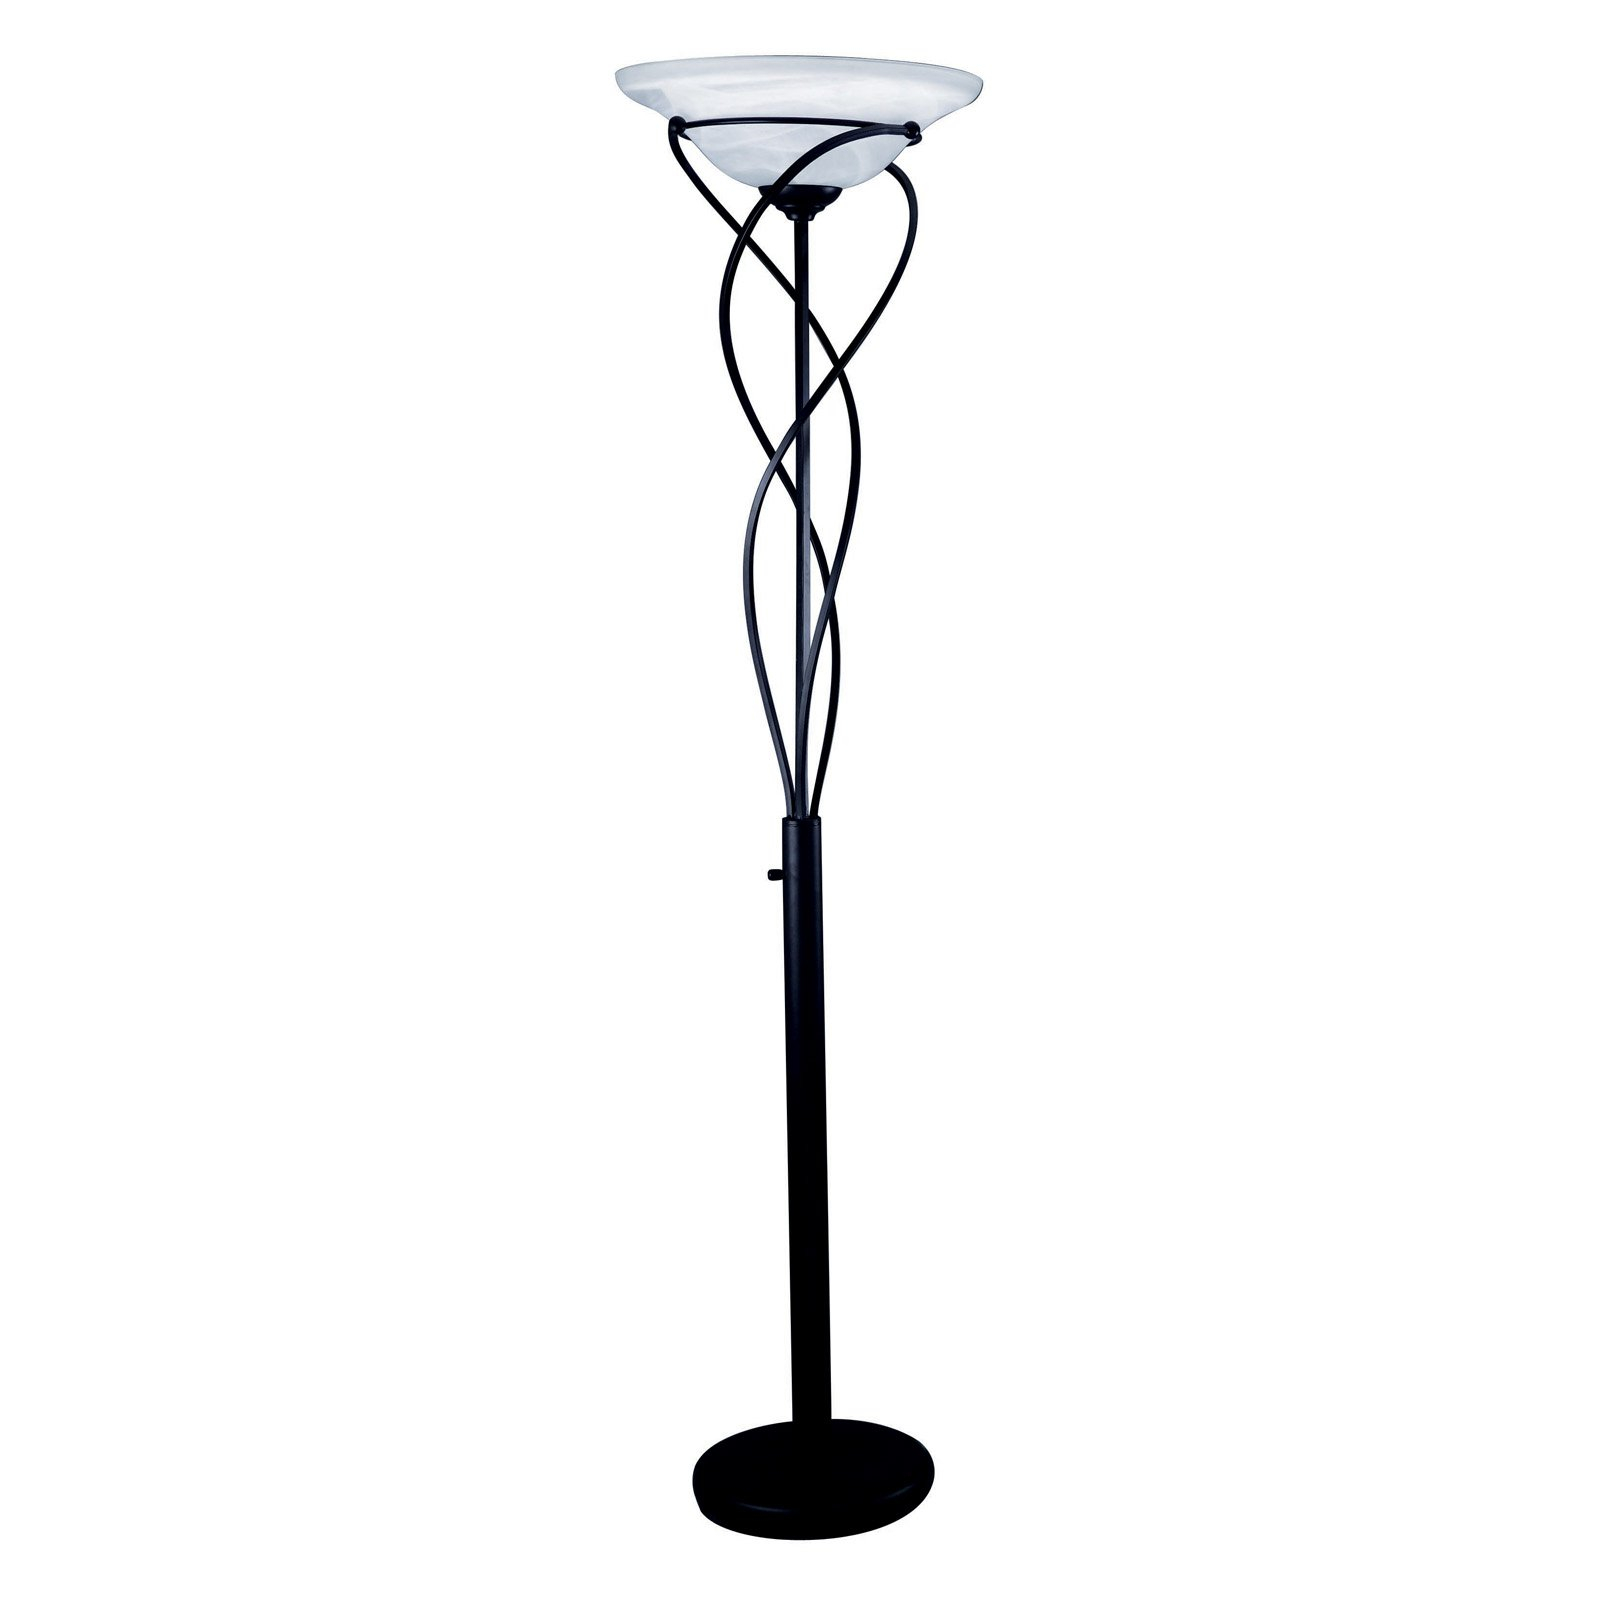 Lite Source Majesty Torchiere Floor Lamp Walmart throughout proportions 1600 X 1600